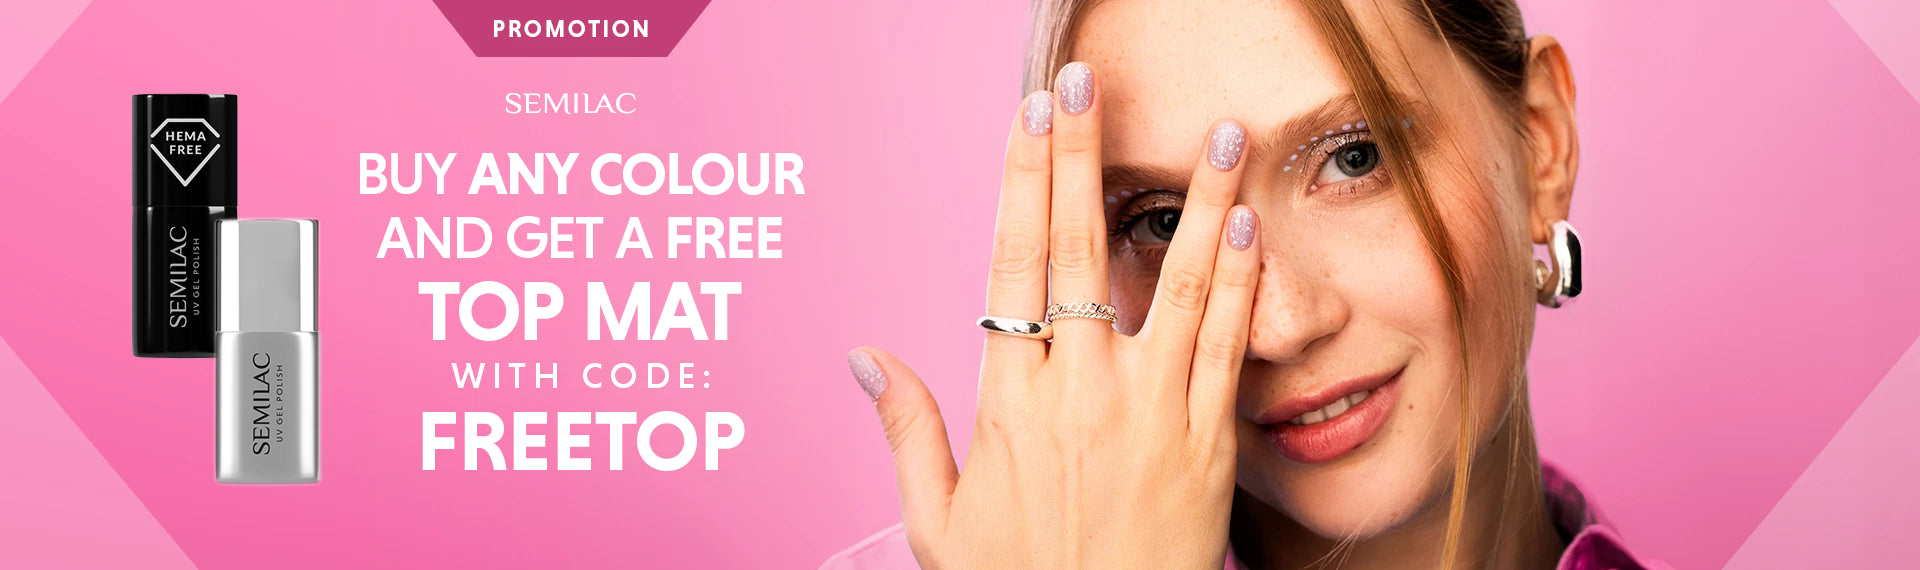 BUY ANY COLOUR & GET A FREE TOP MAT WITH CODE: FREETOP